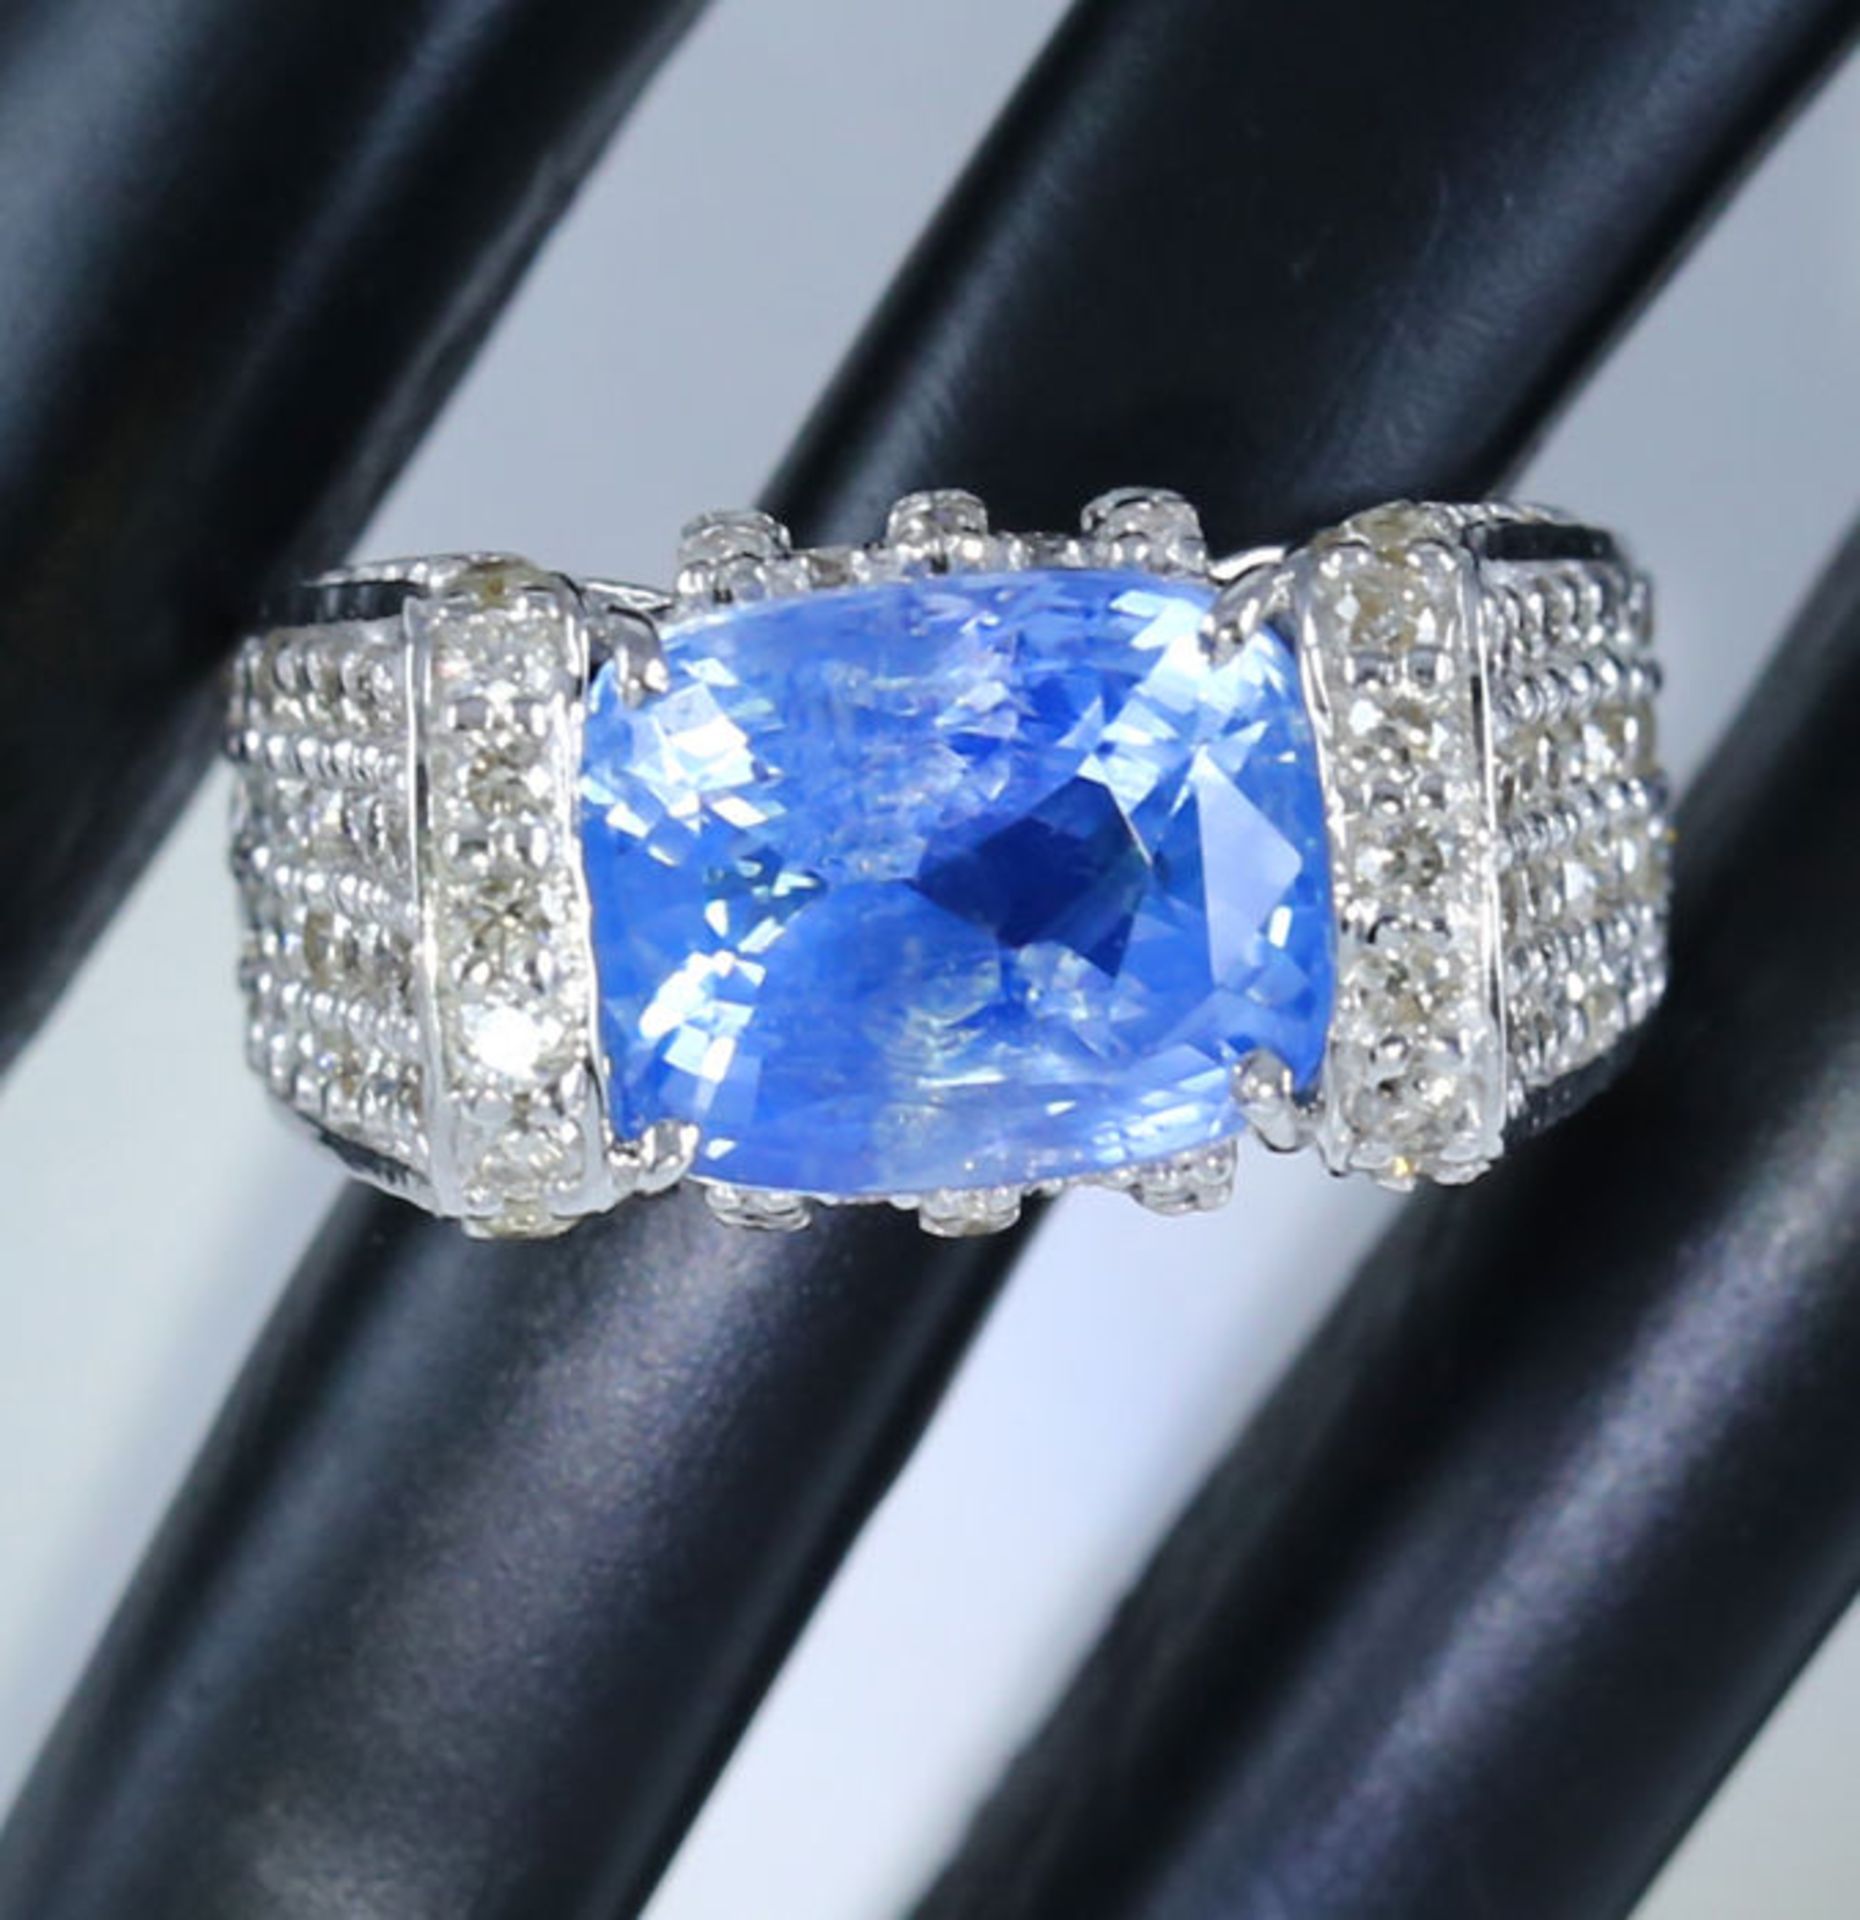 14 K / 585 White Gold Very Exclusive Designer Blue Sapphire (IGI certified) and Diamond Ring - Image 5 of 8